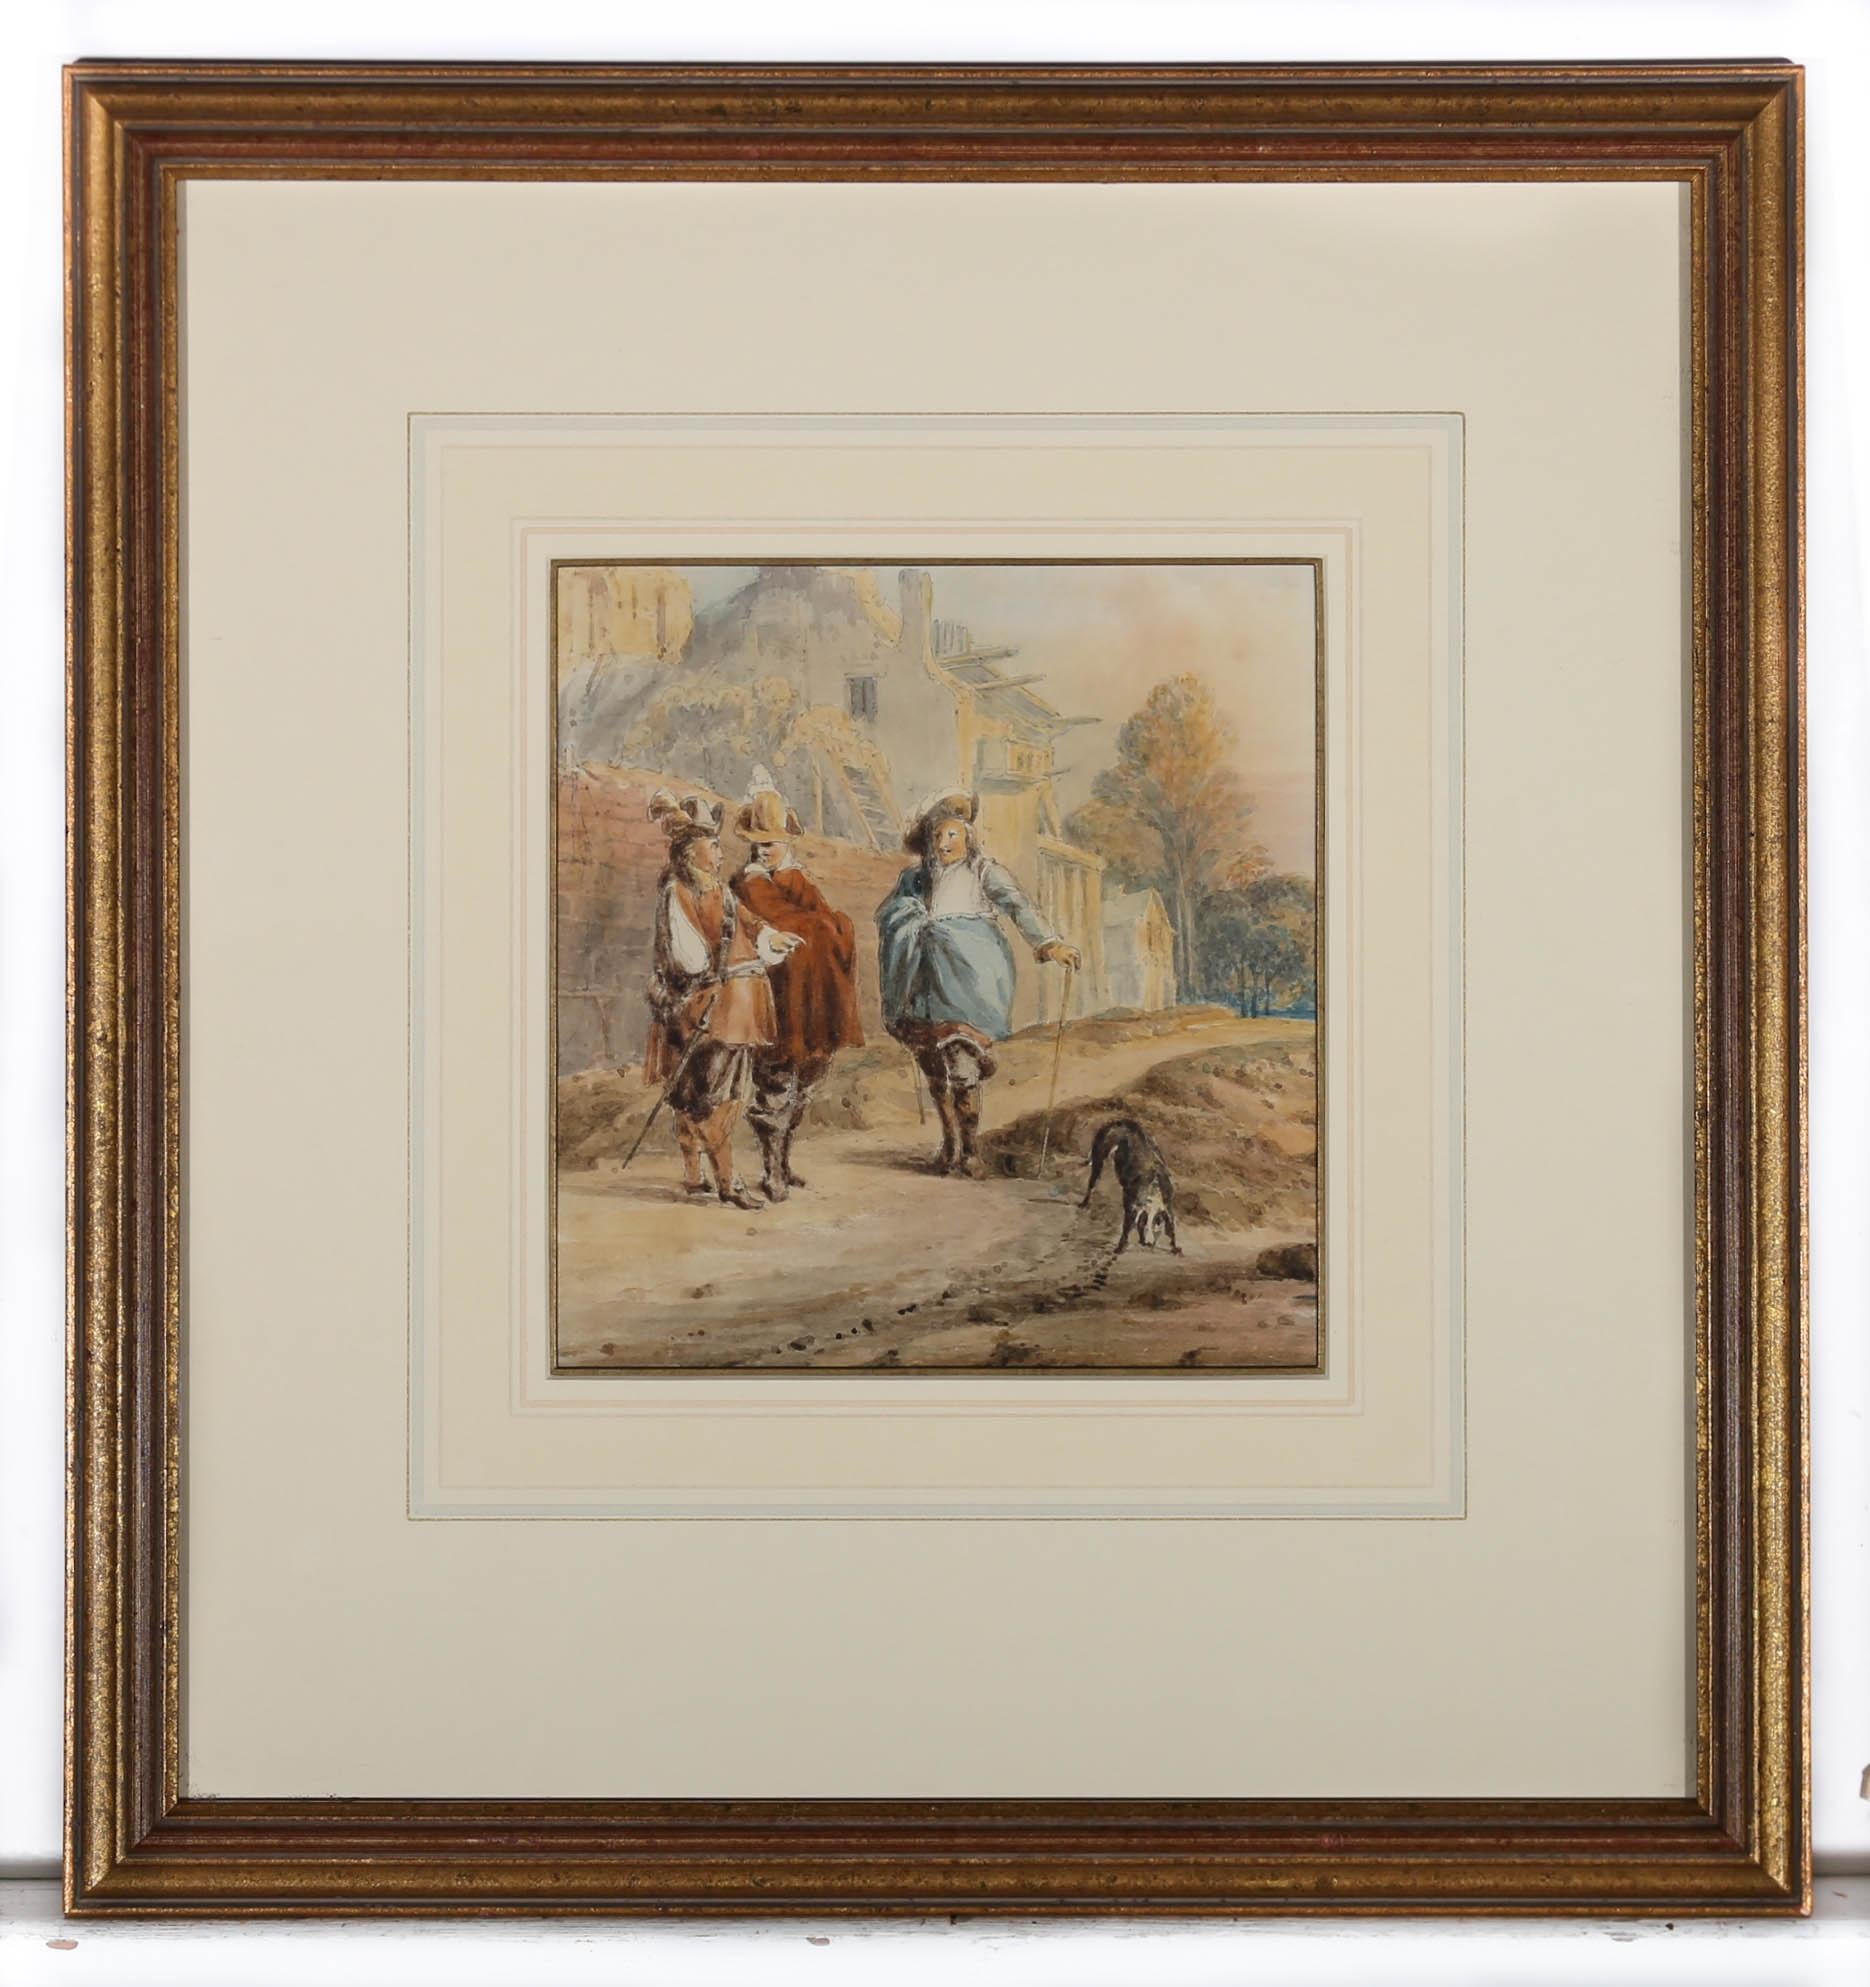 Gossip on the Street- This Mid 19th century watercolour depicts three boastful Frenchmen having a public natter in front of several french style houses. The artist has captured a dog to the lower right of the scene, with his nose to the ground,